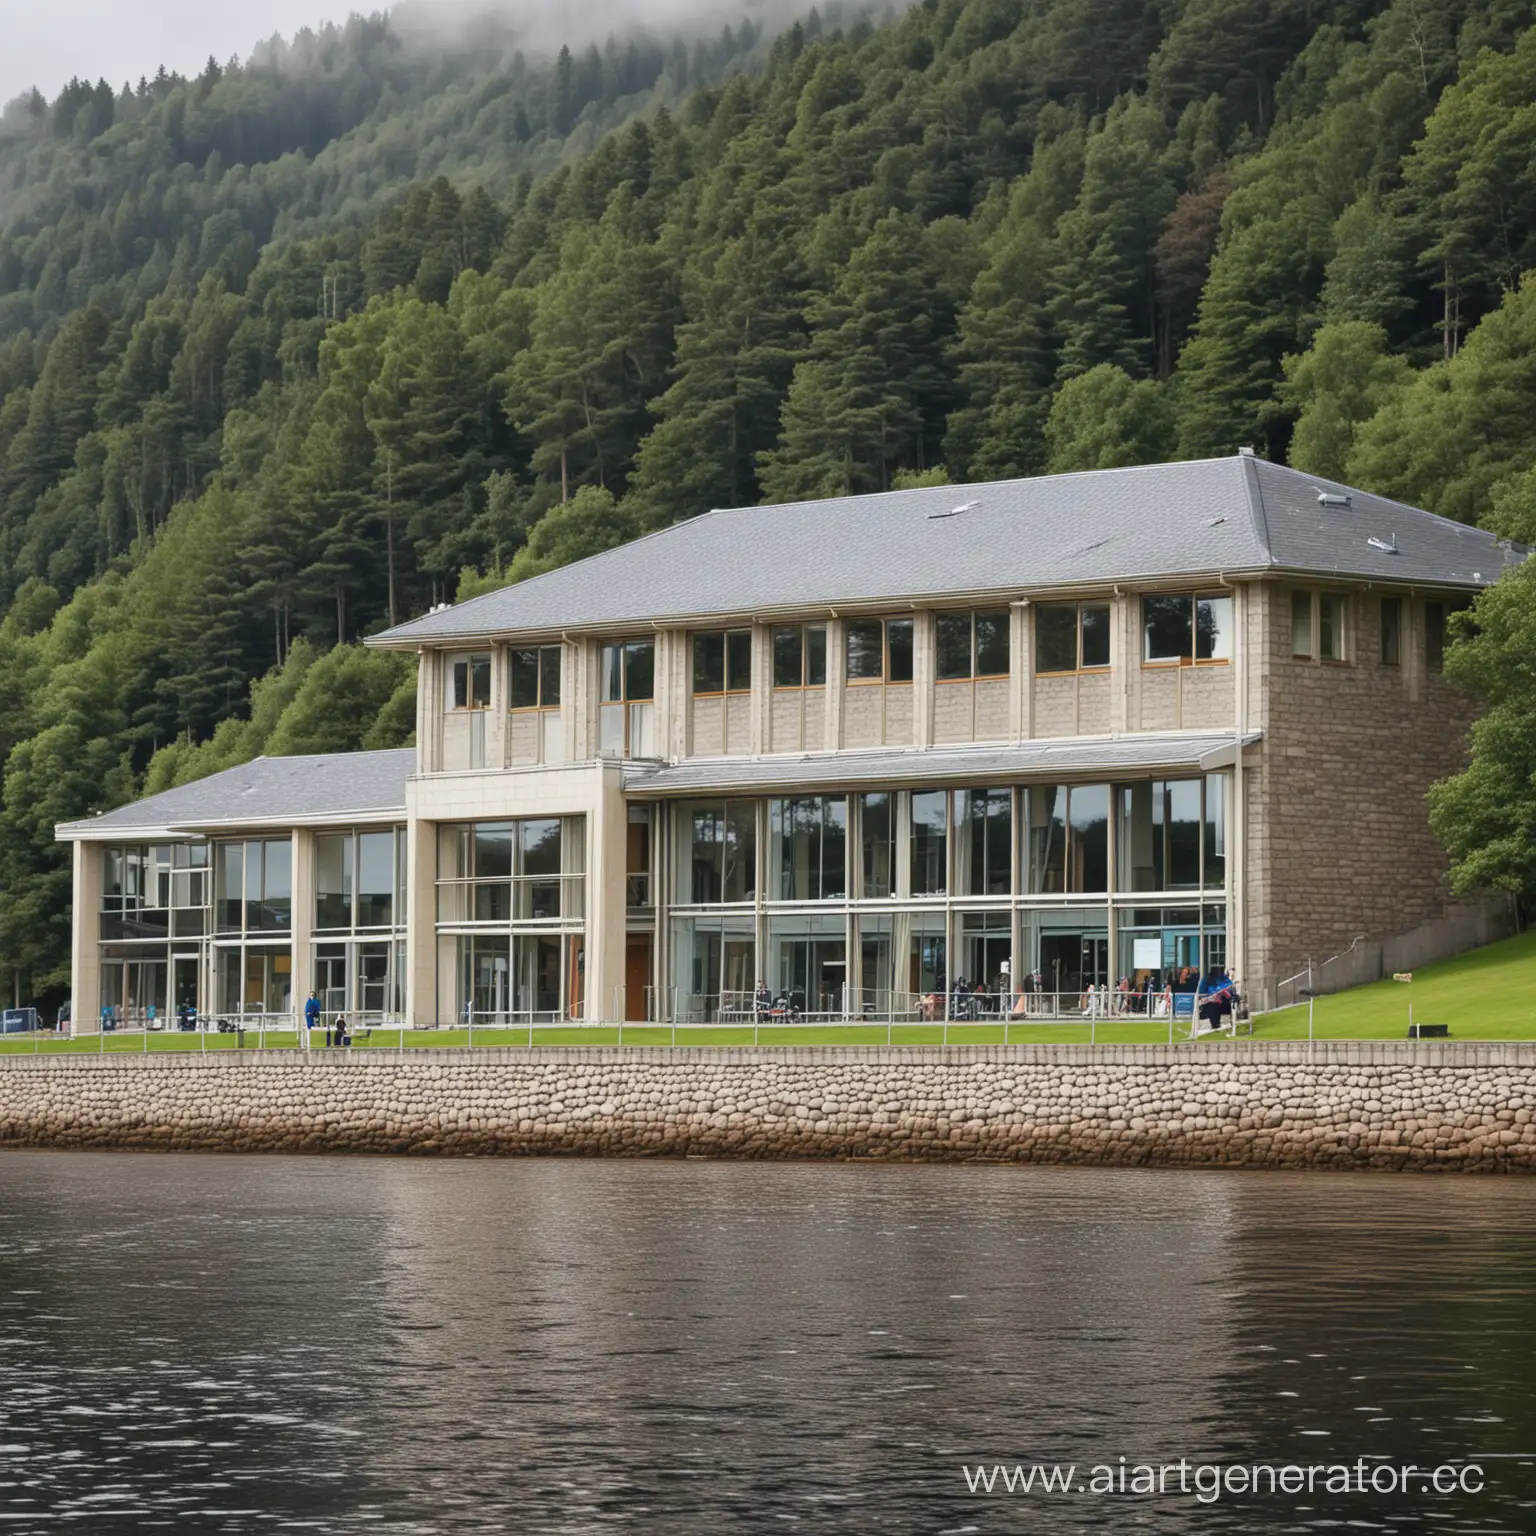 Modern-Loch-Ness-School-Building-with-Colorful-Windows